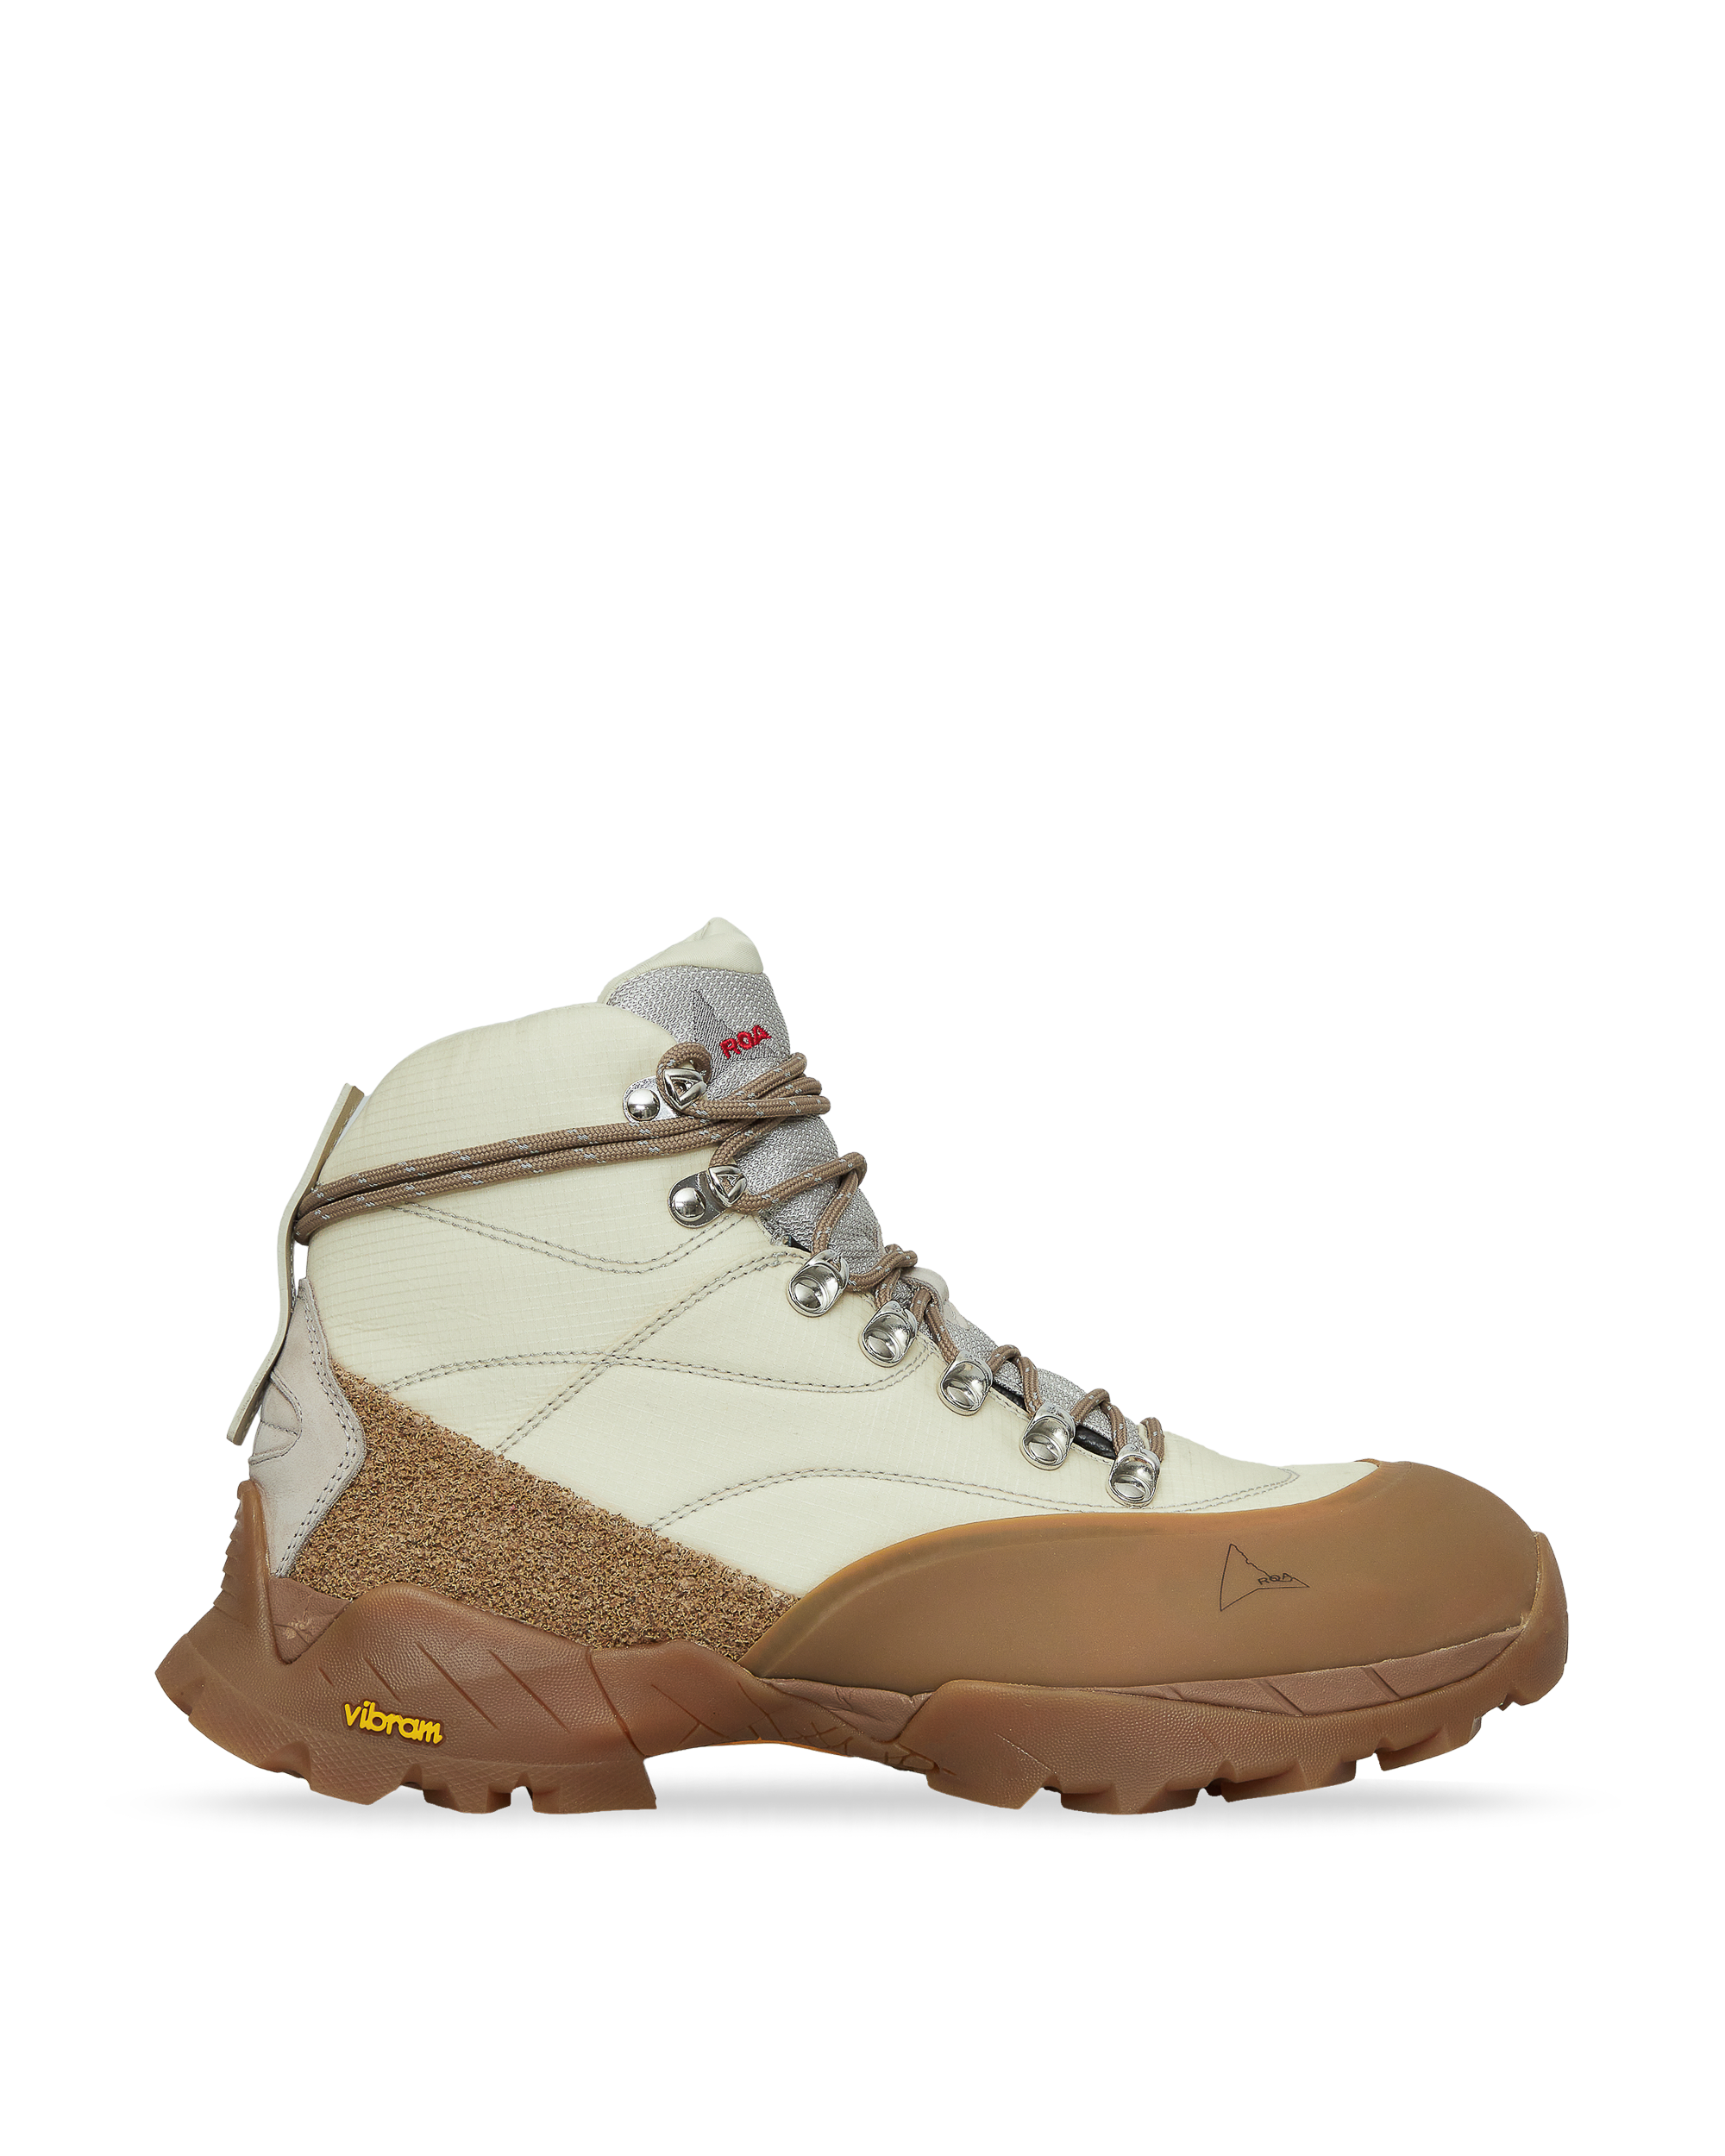 Buy Italian Hiking Boots Online In India  Etsy India